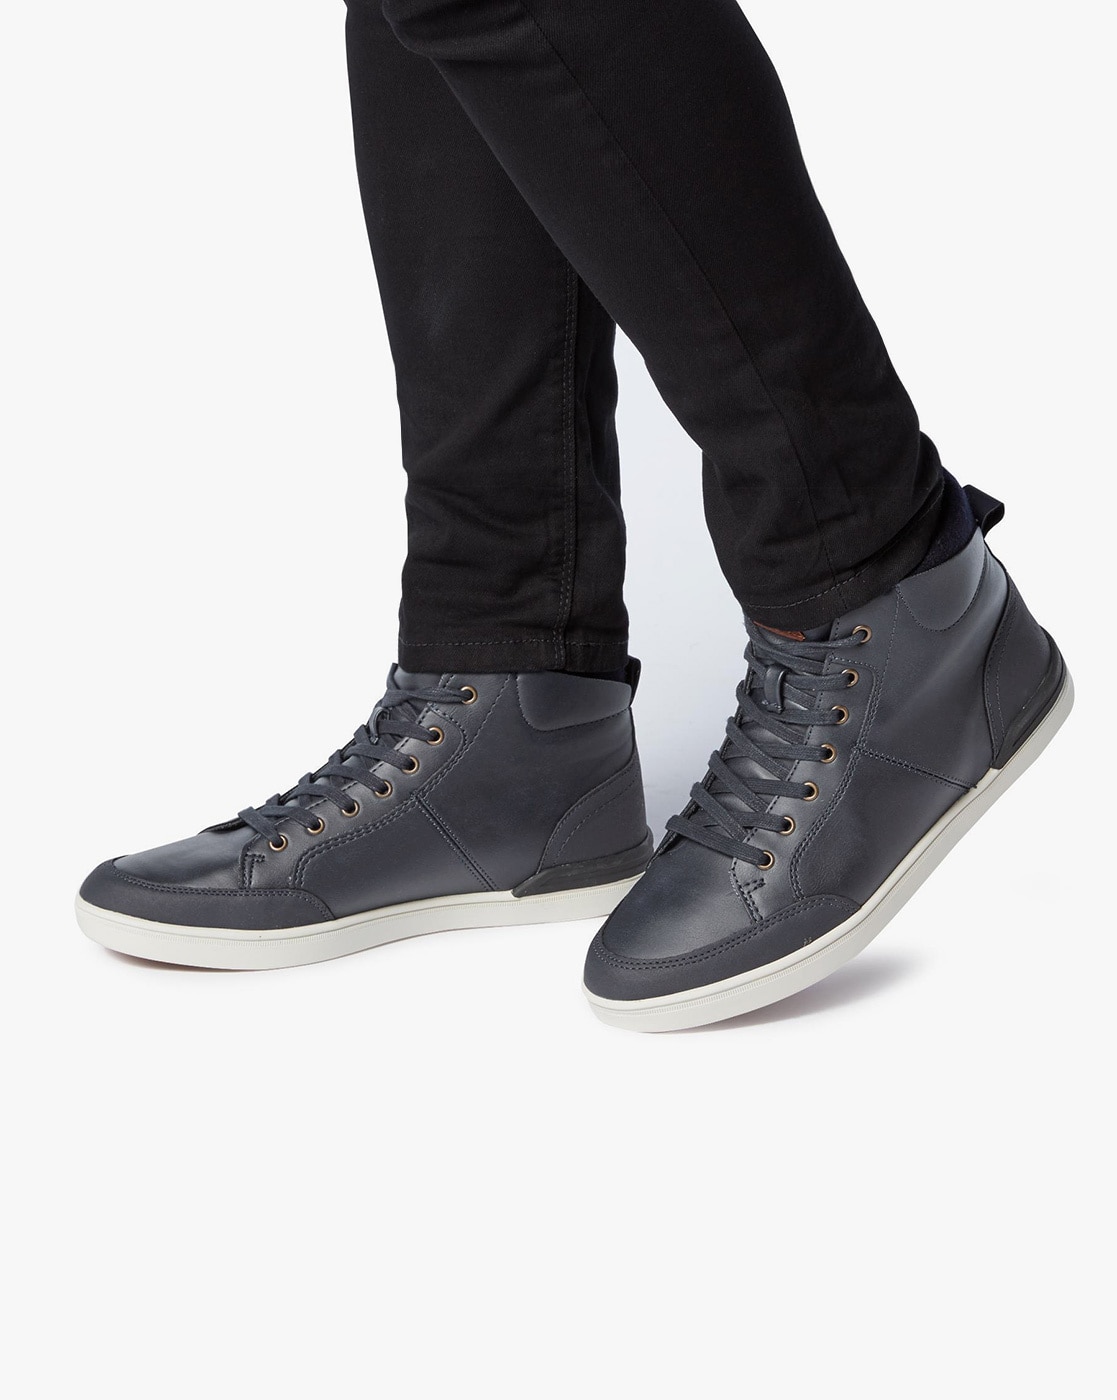 Navy Blue Boots for Men by Dune London 